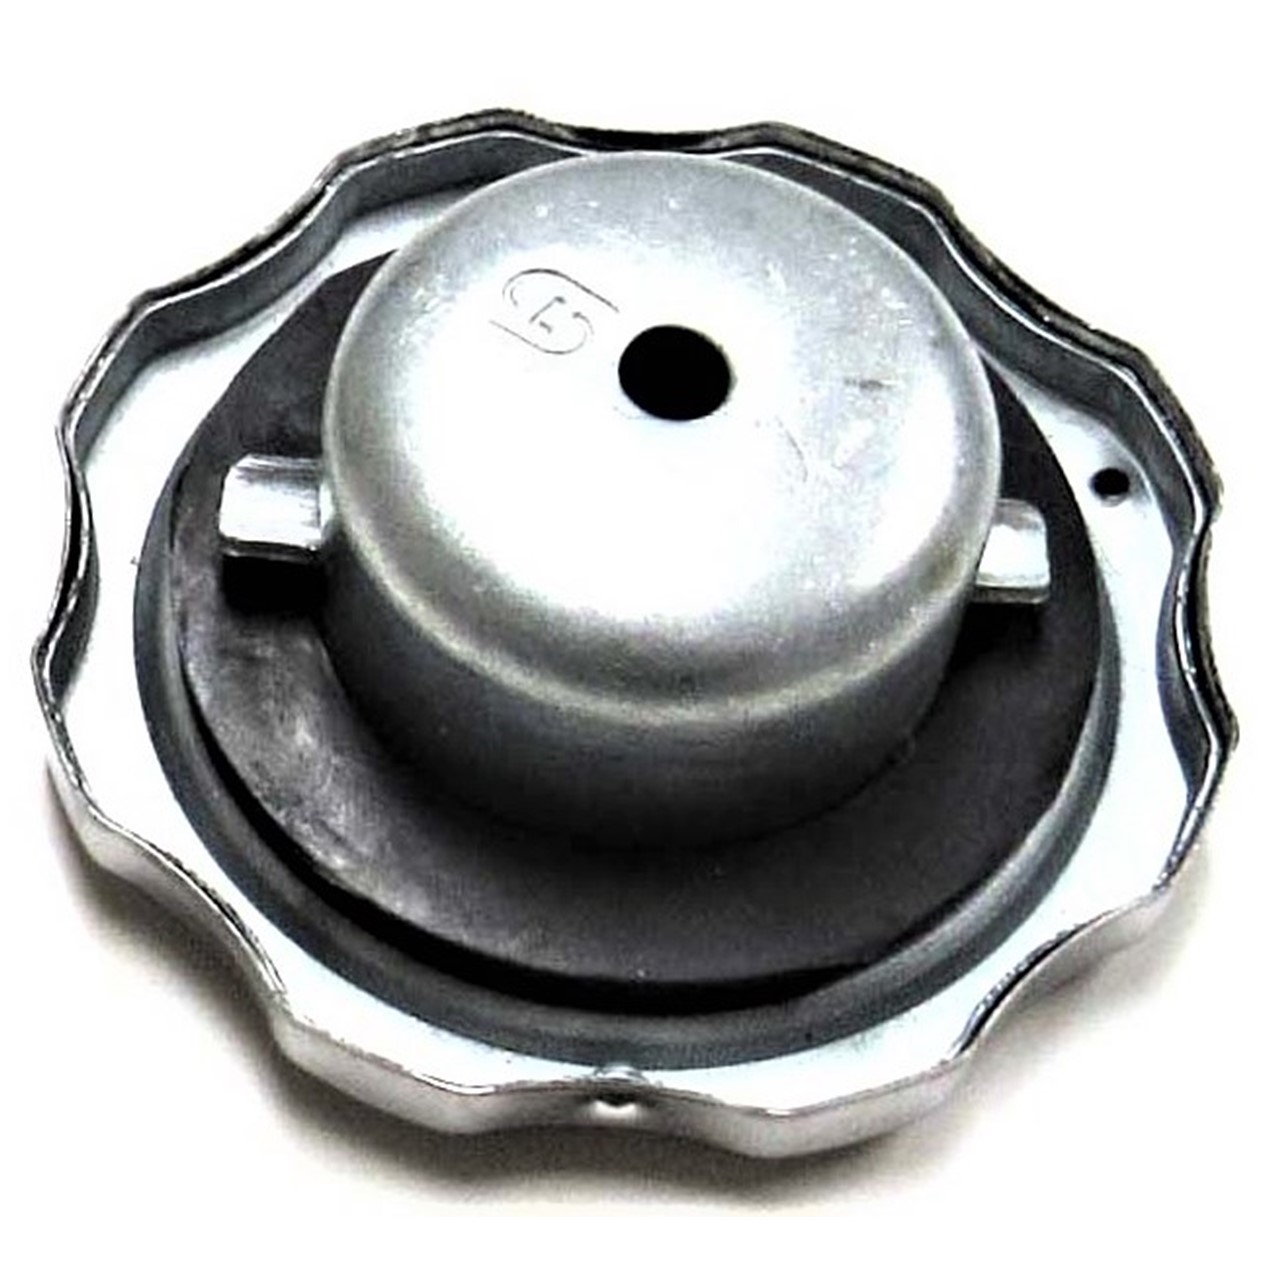 Gas Cap 38mm Chrome OD=70mm Fits ATVs, GoKarts, Minibikes, Power Equipment Fits Honda GX Type Motors + Others - Click Image to Close